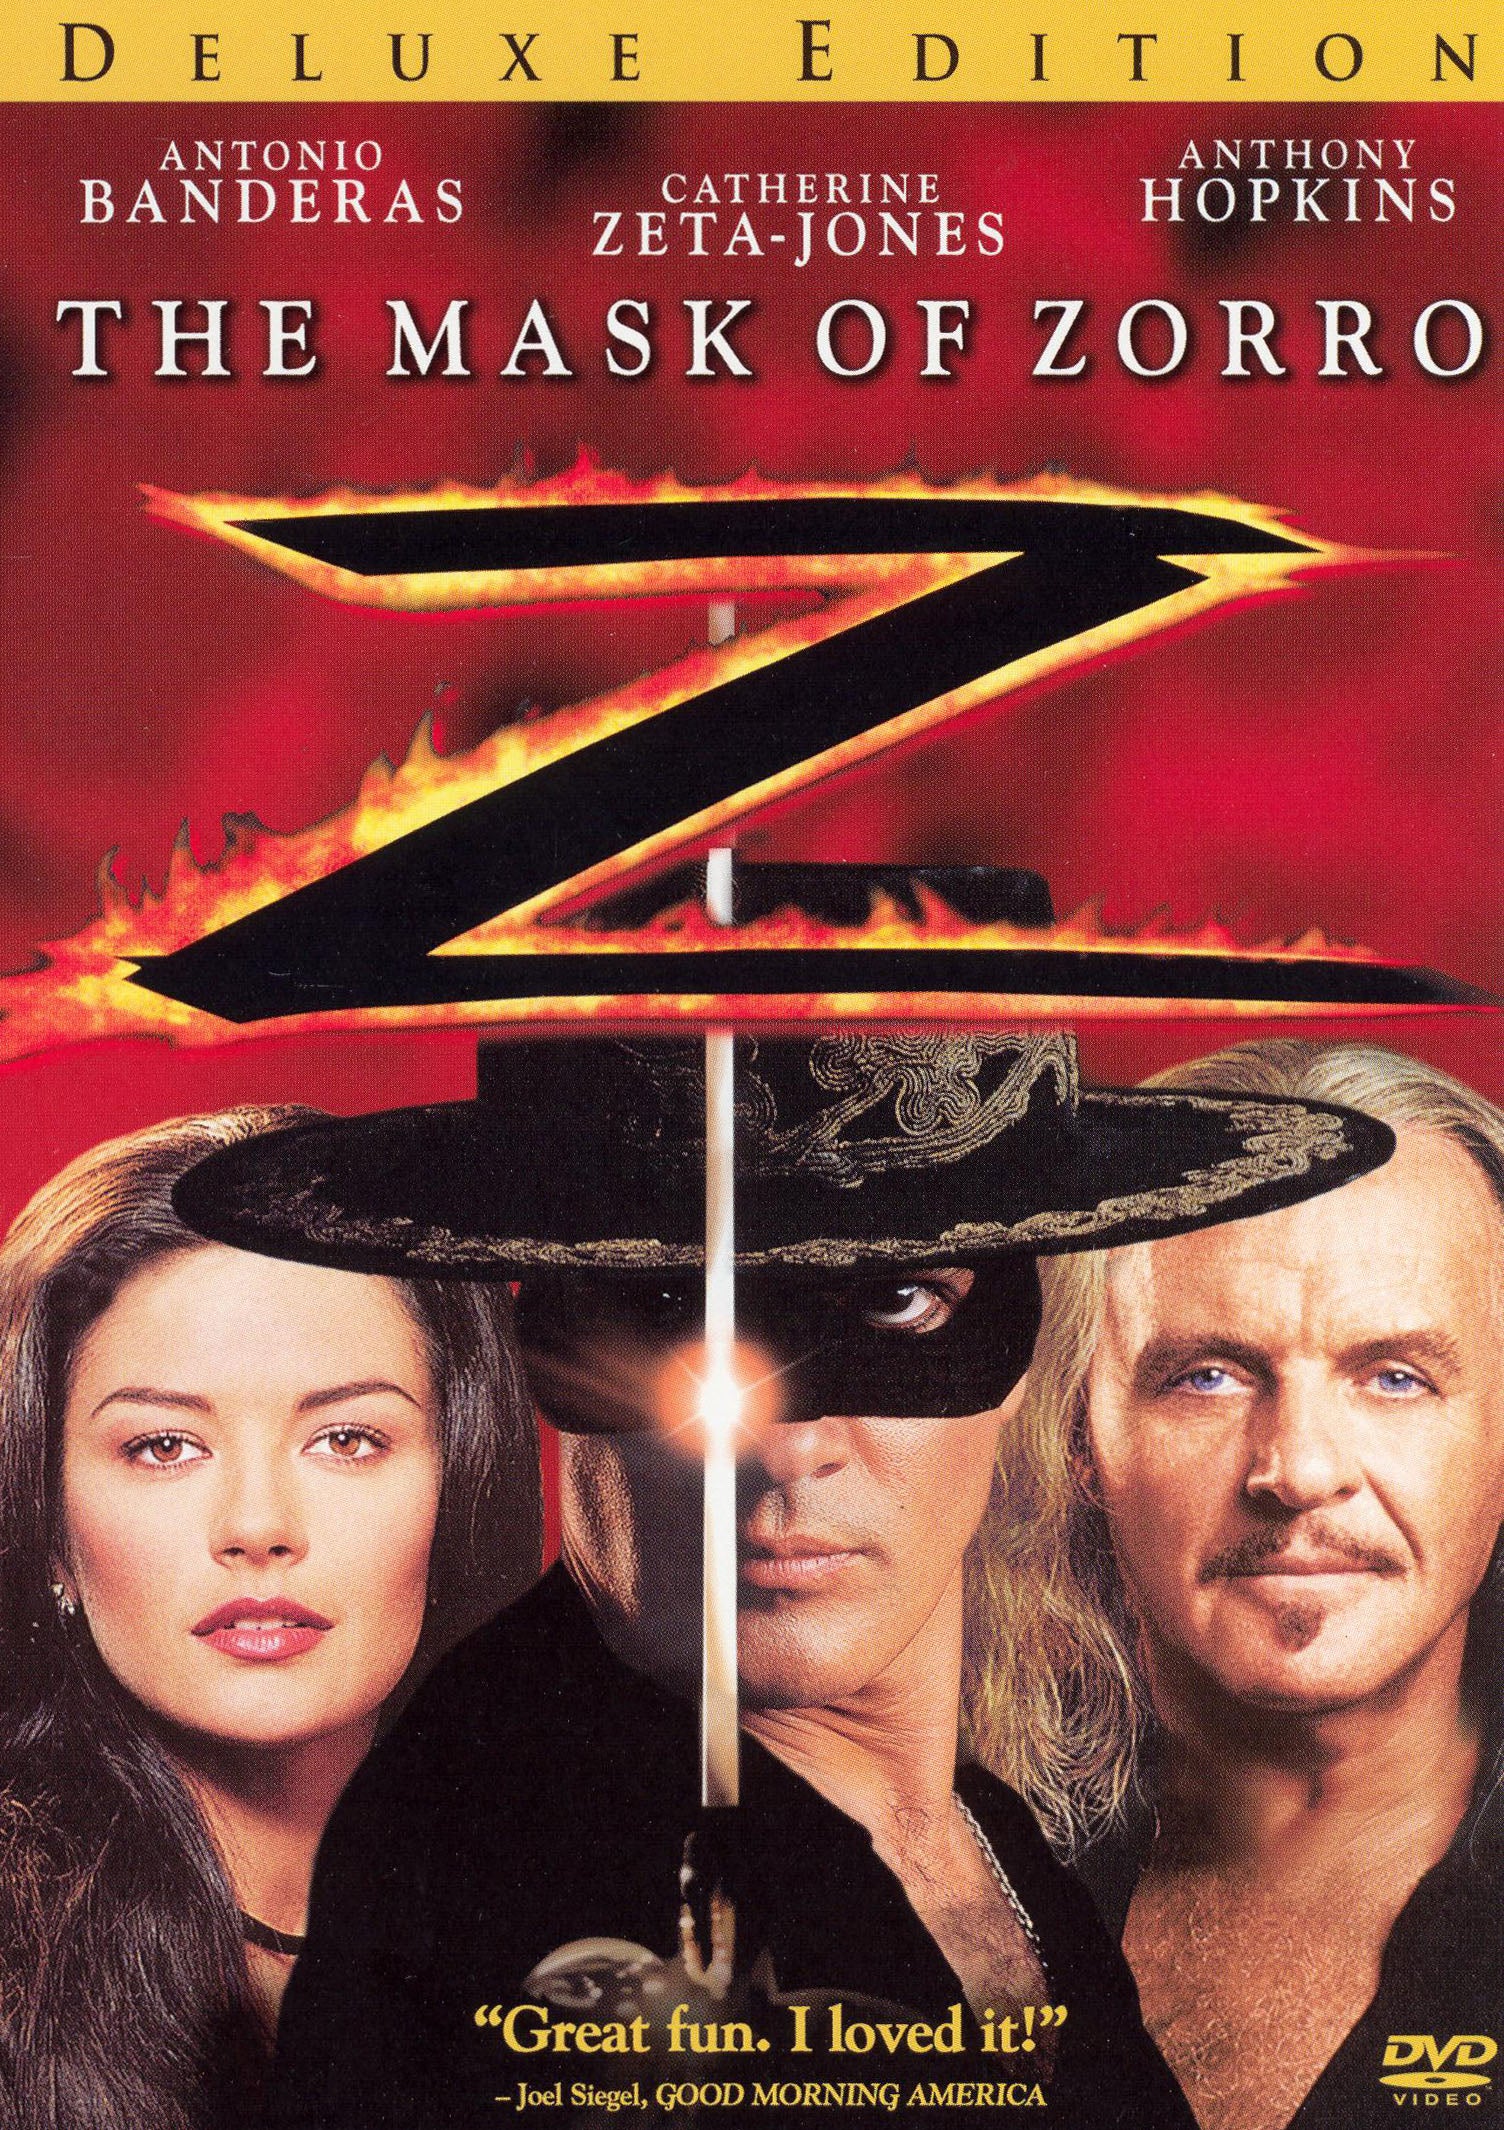 Mask of Zorro [Deluxe Edition] cover art